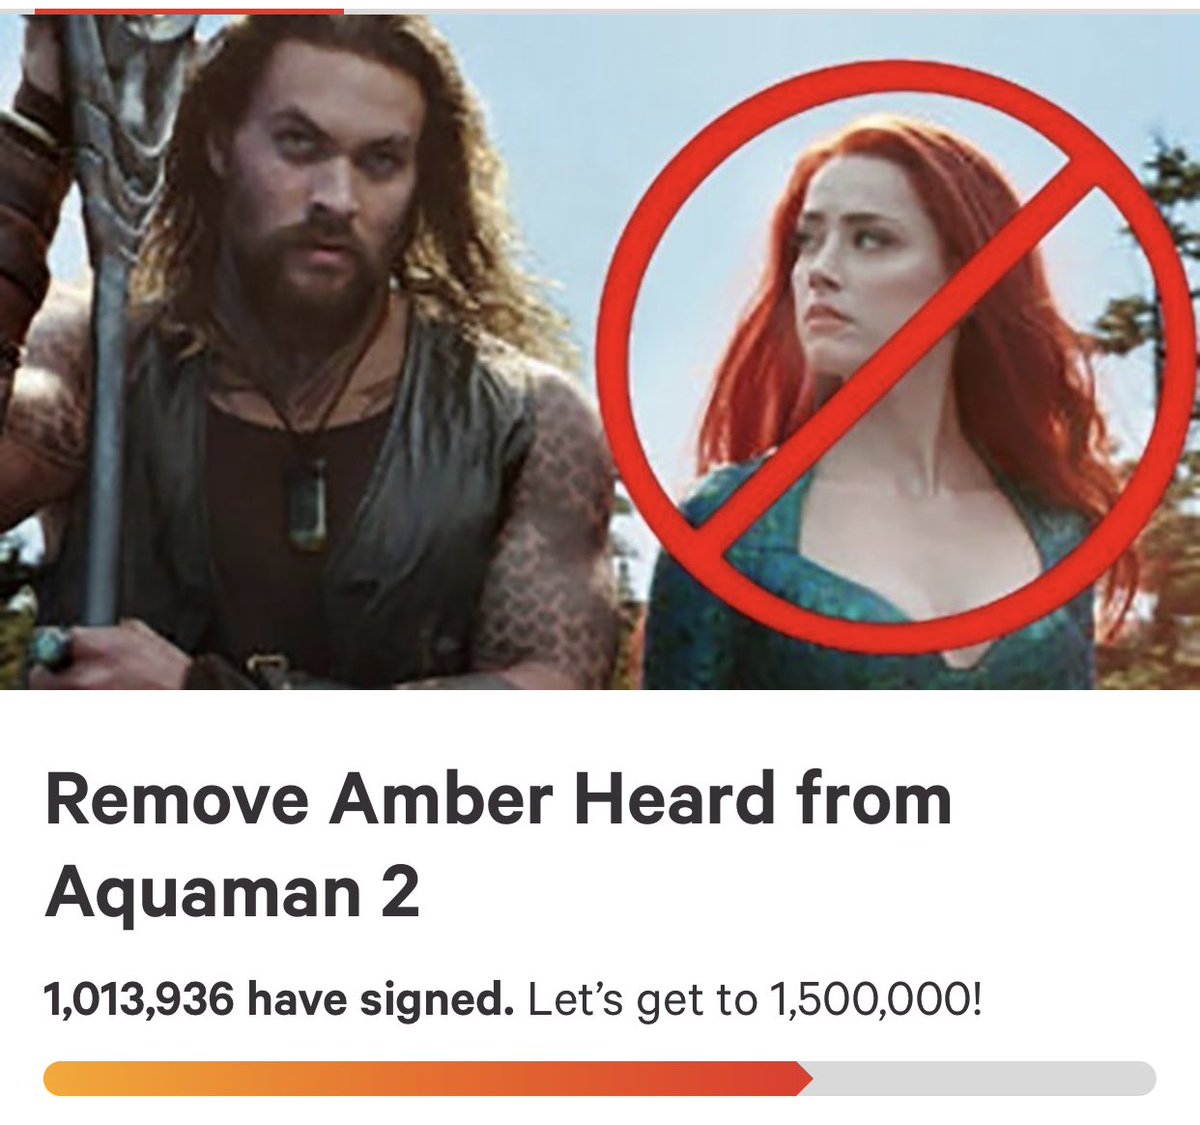 4) OVER ONE MILLION PEOPLE WANT AMBER HEARD FIRED.This is a pretty obvious reason why WB should fire Amber Heard.*Sign the petition if you haven't:  https://www.change.org/p/dc-entertainment-remove-amber-heard-from-aquaman-2 #AmberHeardIsAnAbuser  #FireAmberHeard  #JusticeForJohnnyDepp